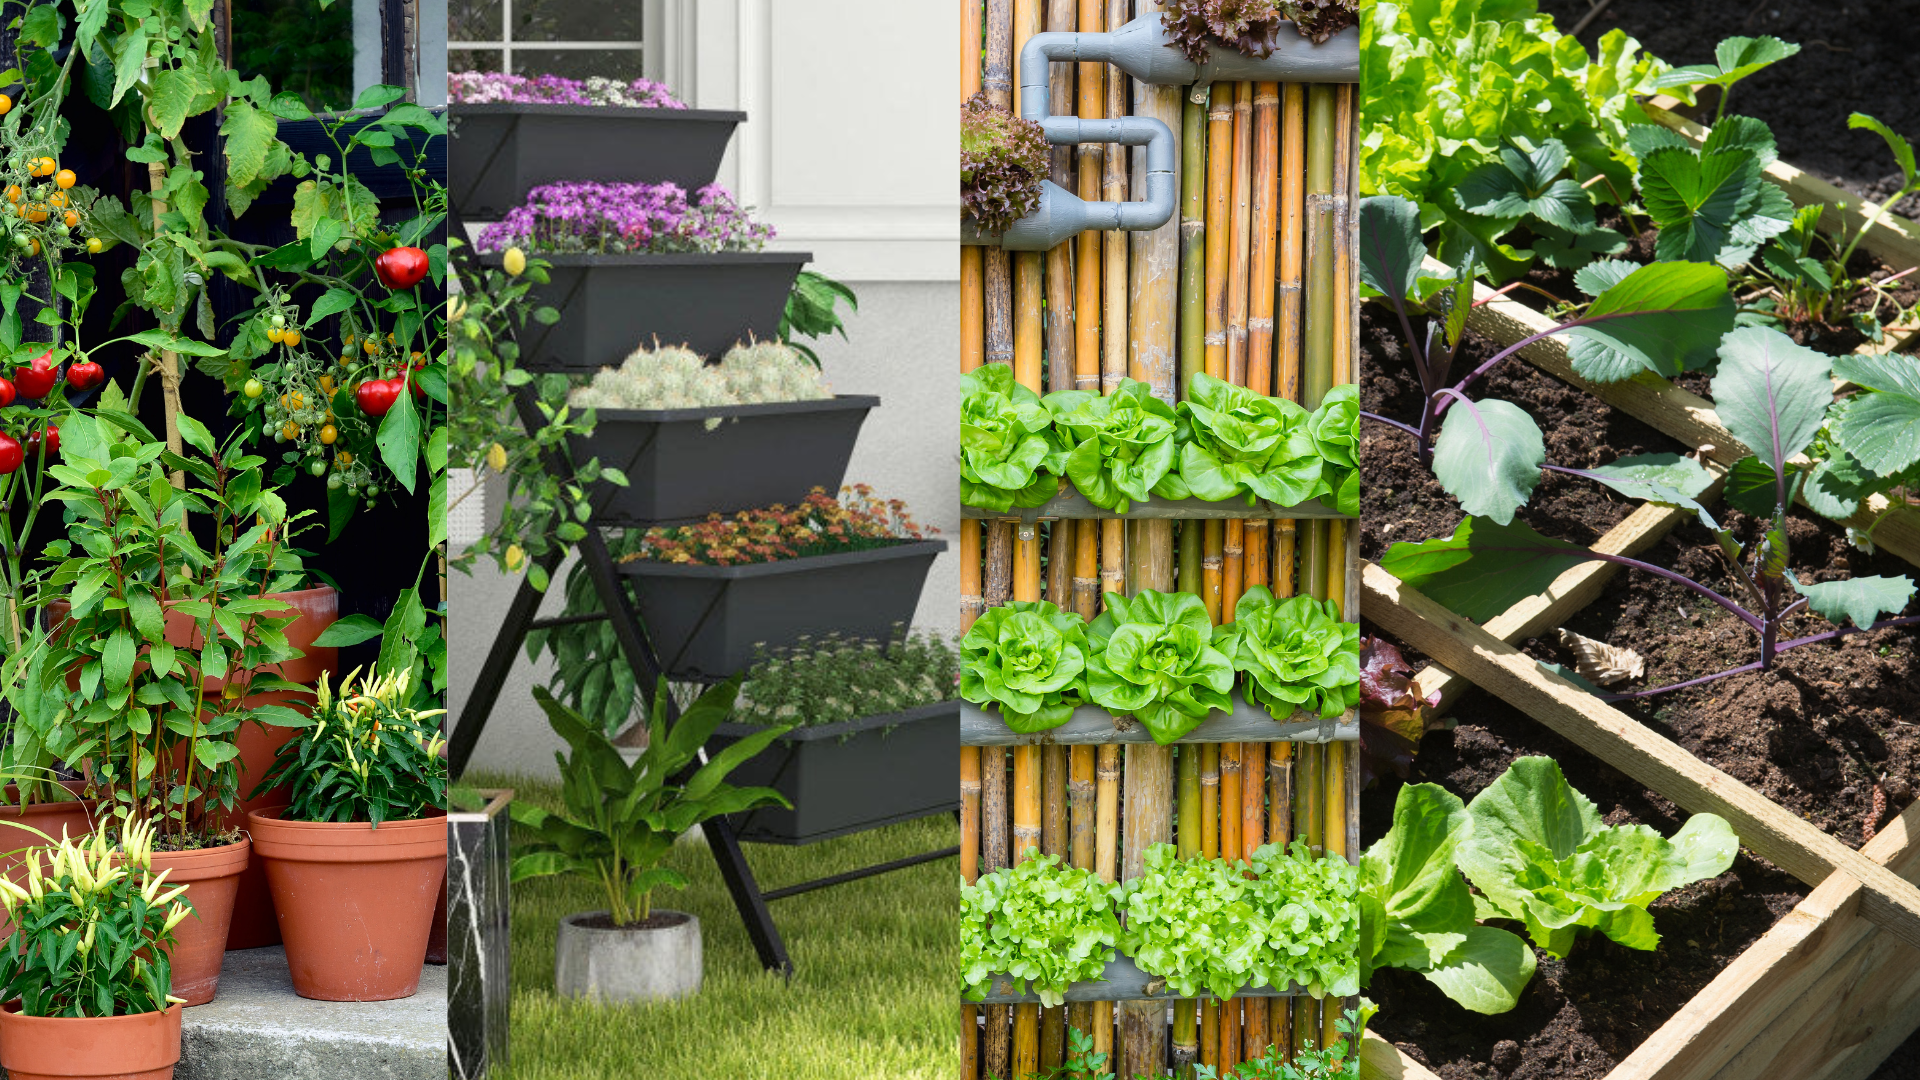 20 Gardening Techniques to Choose From to Maximize Your Space